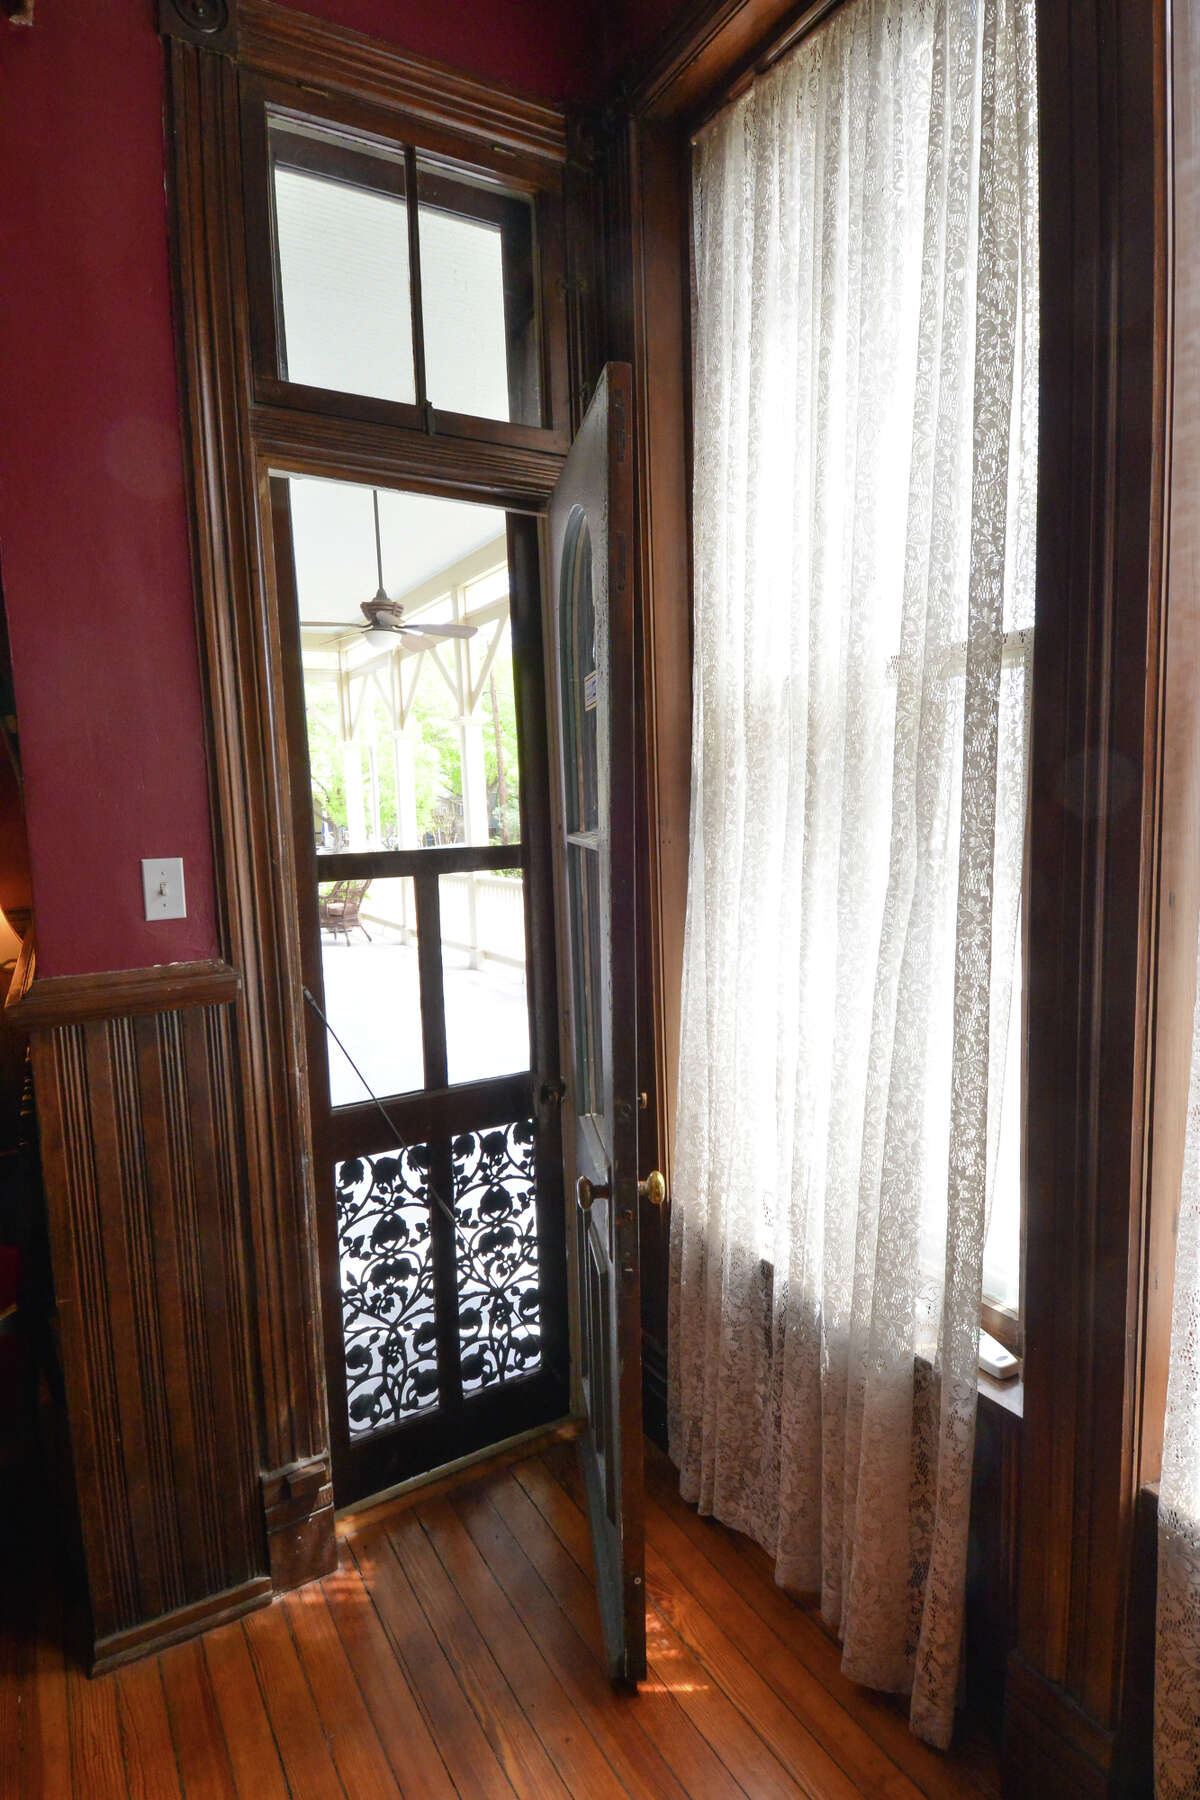 A narrow door leads to the porch of the King William district home of Belinda Molina.